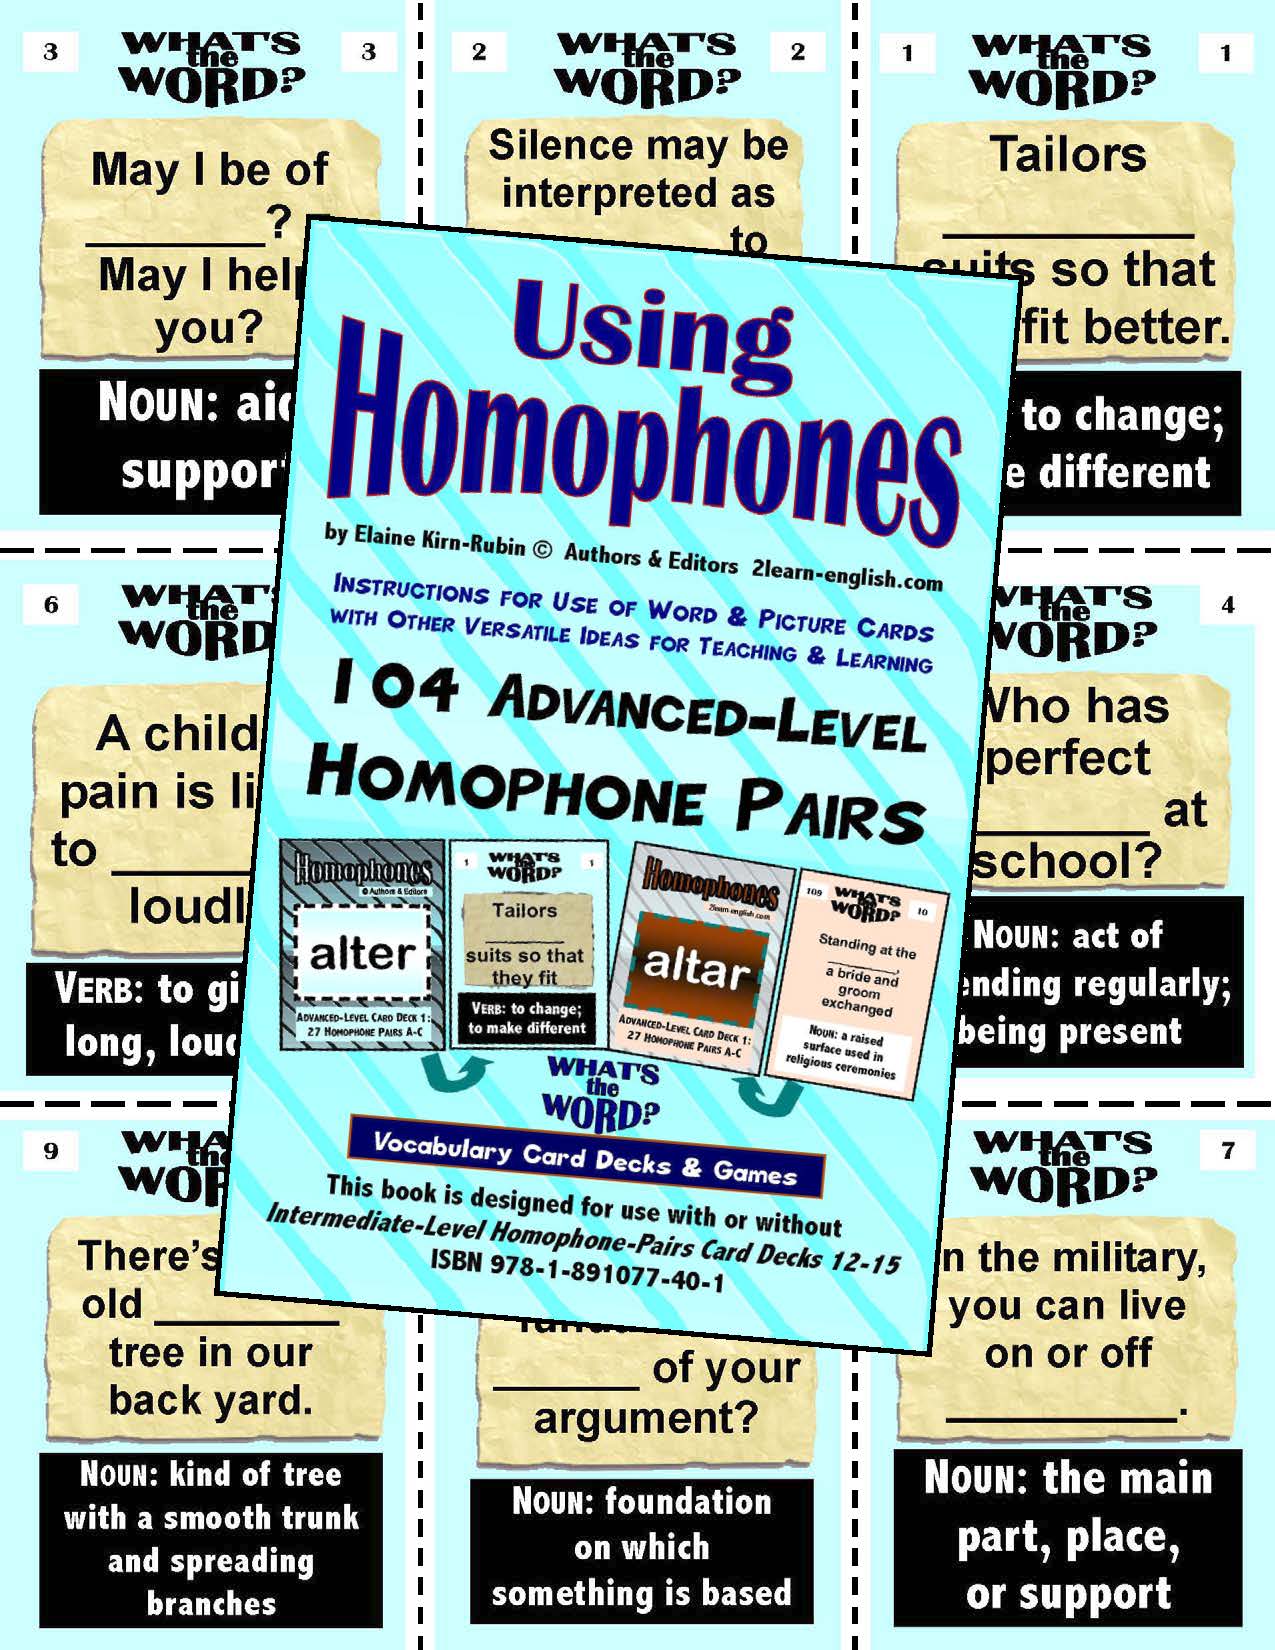 H. Homophones, Using <br/> Levels 2-4 = Beginning Through Advanced <br/> 15 Packs of Vocabulary Pairs + 3 Activities & Ideas Books (Print Version + Shipping)